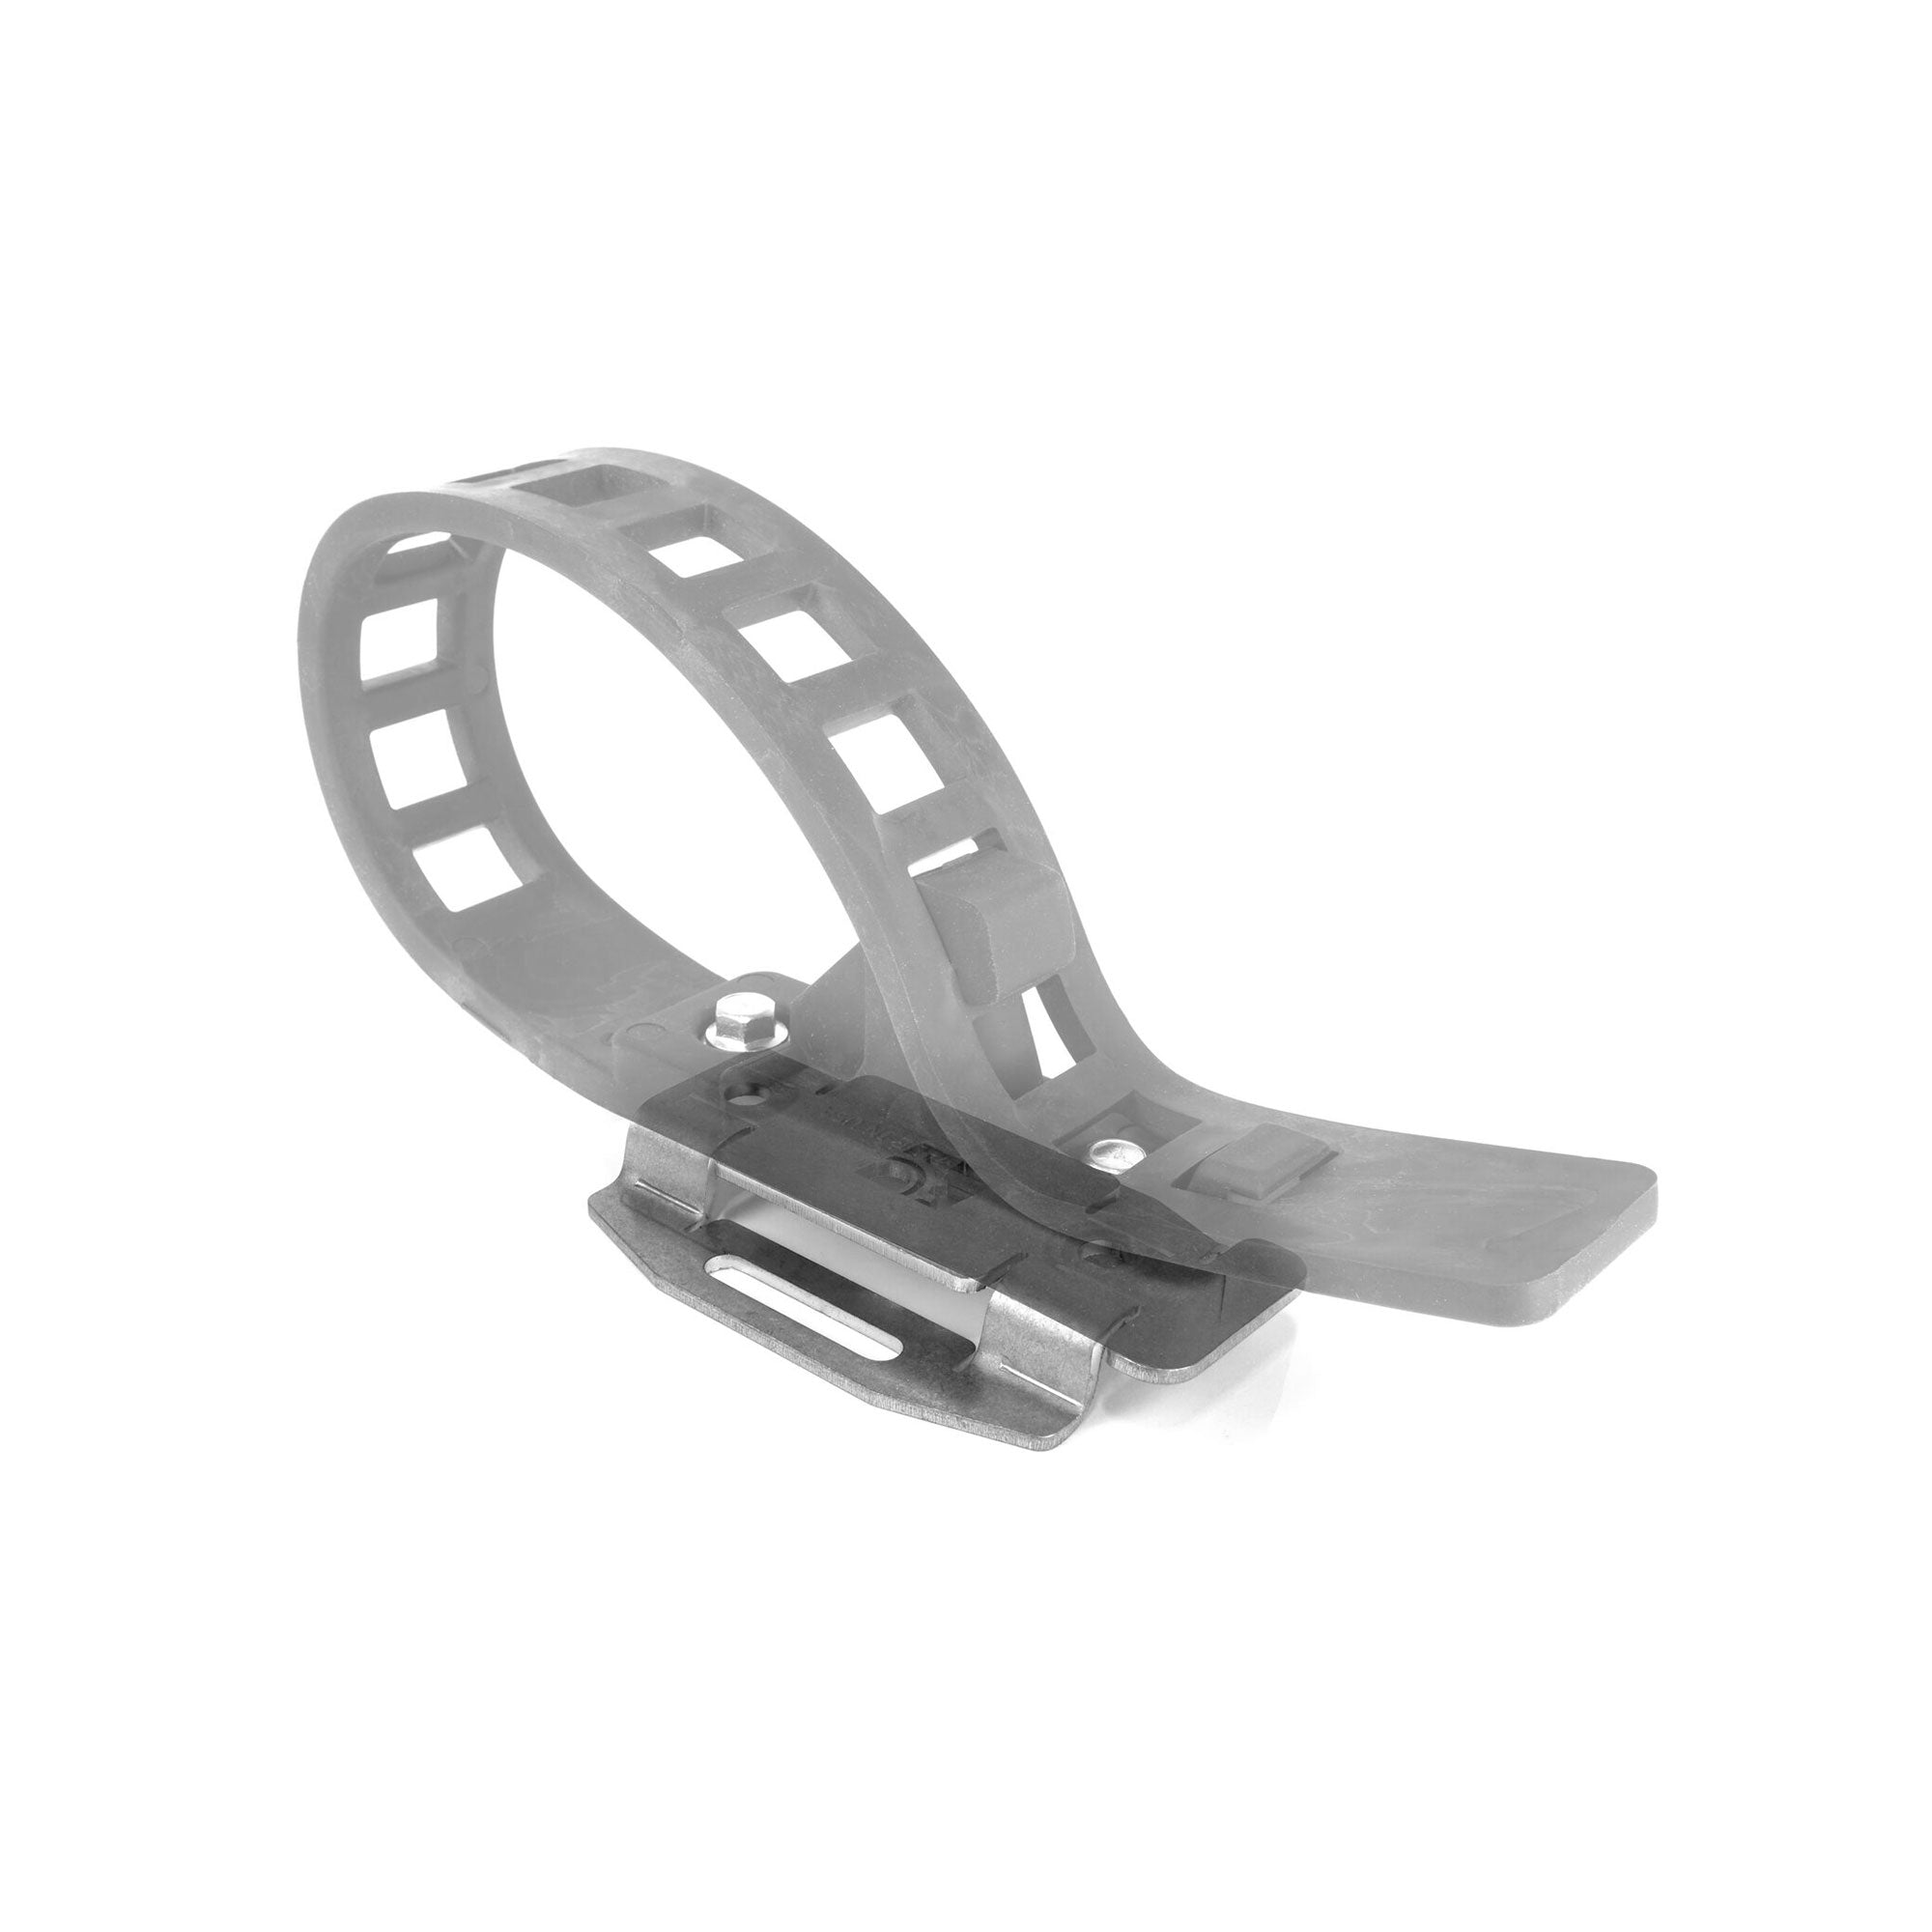 BuiltRight Industries Quick Fist Riser Mount - Long Arm